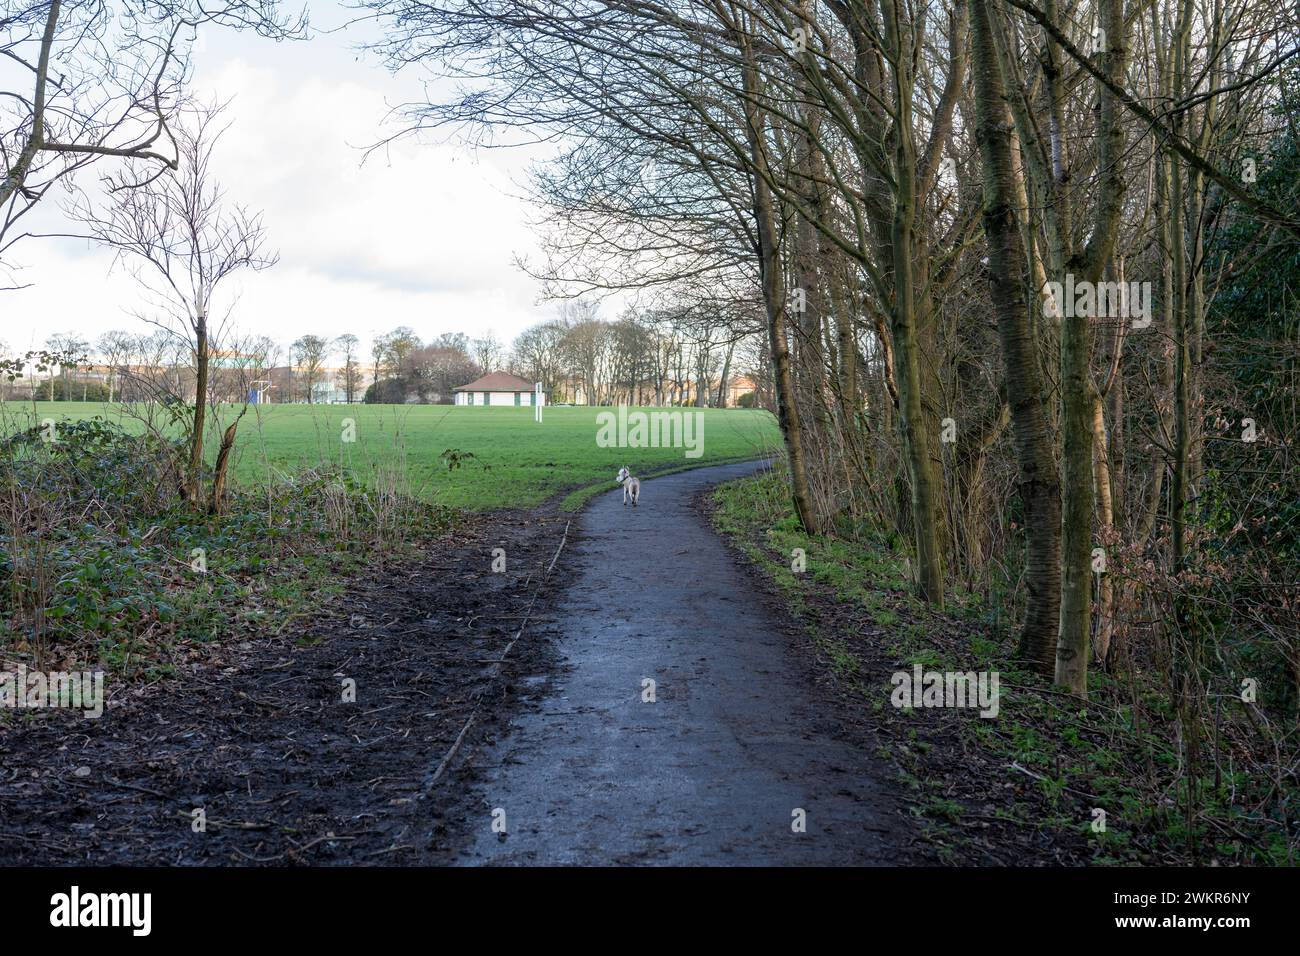 A small dog walking alone on a wet path through trees in a park in winter. Dog walking theme. Stock Photo